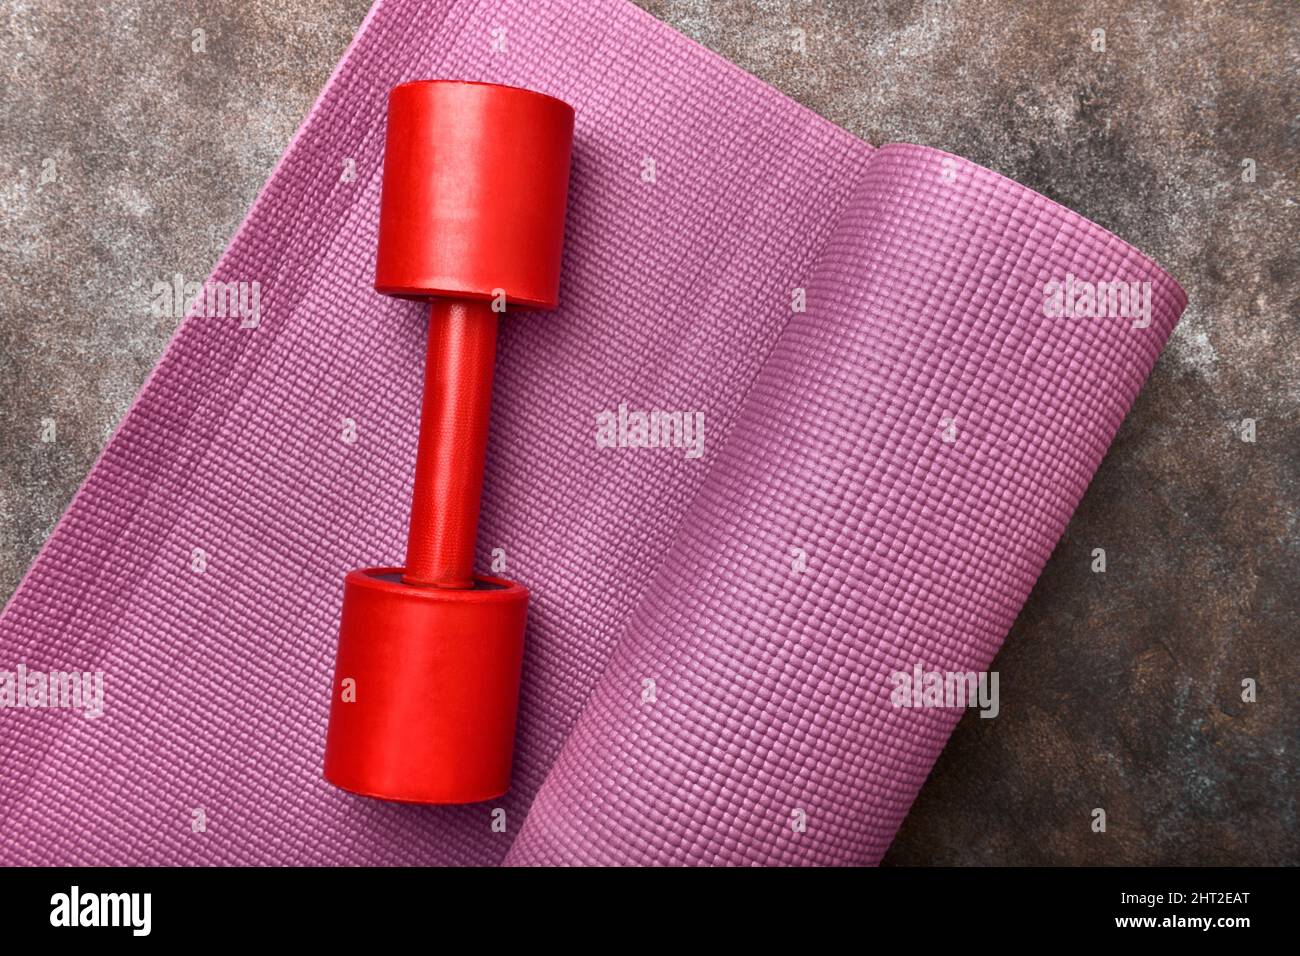 Rubber exercise mat and red dumbbell Stock Photo